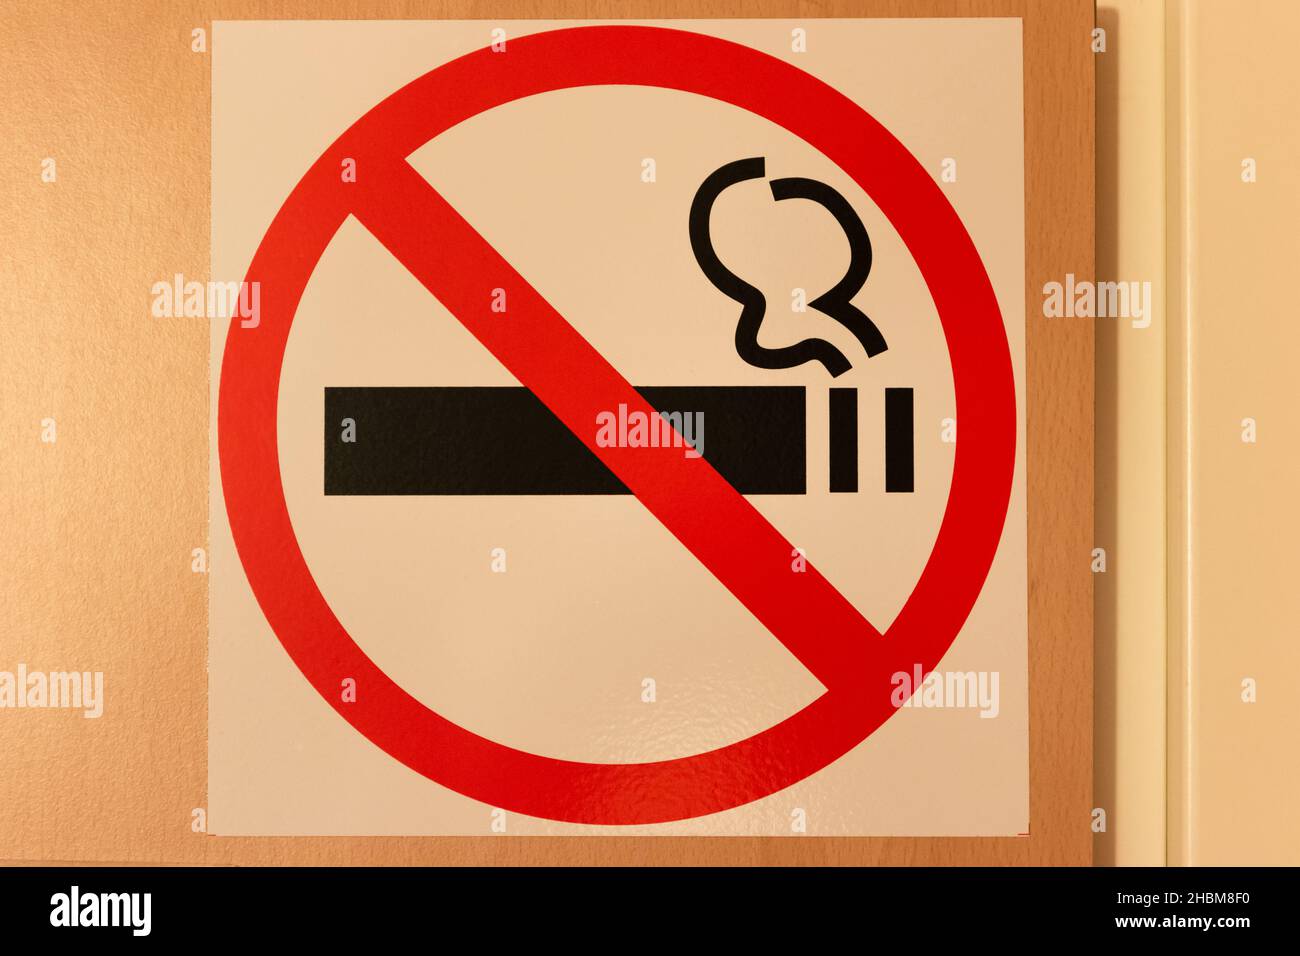 No smoking sign on the wall in the corridor of the room. A bright red circle with a crossed out smoking cigarette. Close-up Stock Photo